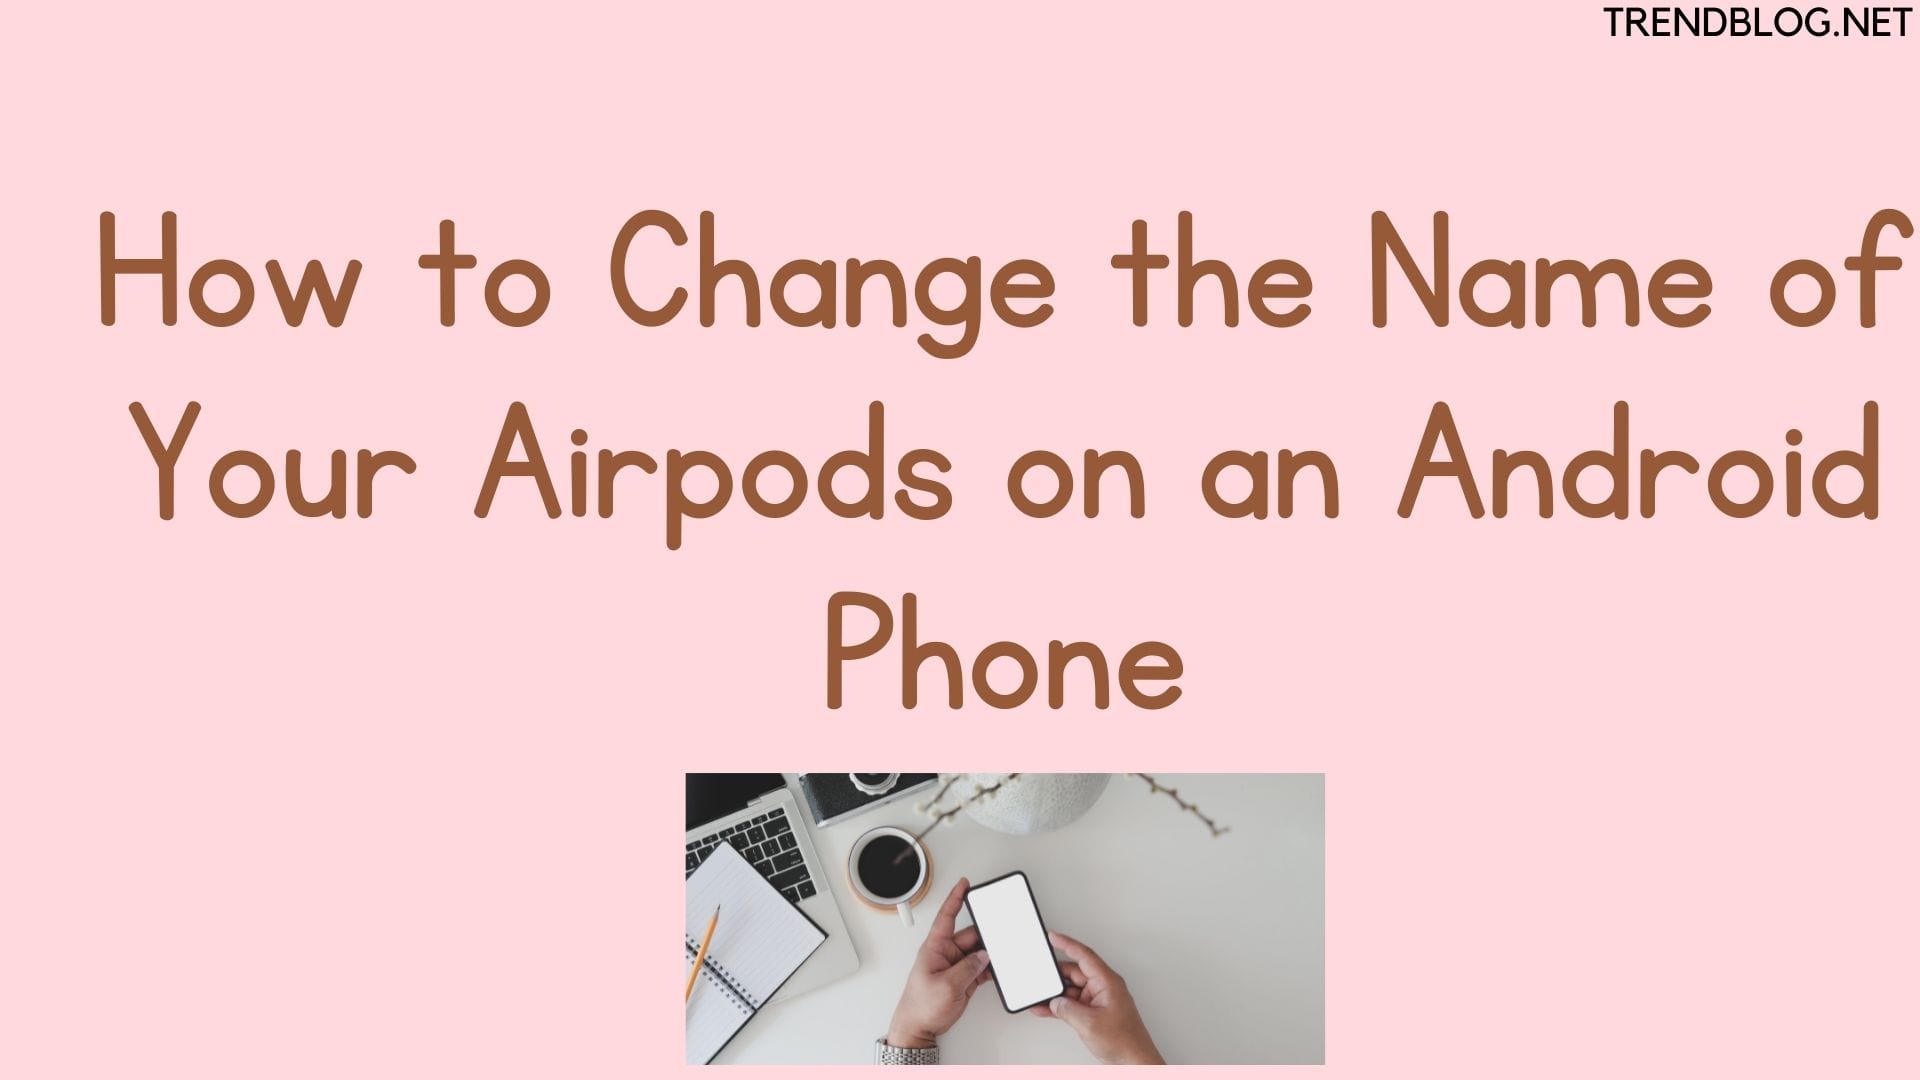 How to Change the Name of Your Airpods on an Android Phone